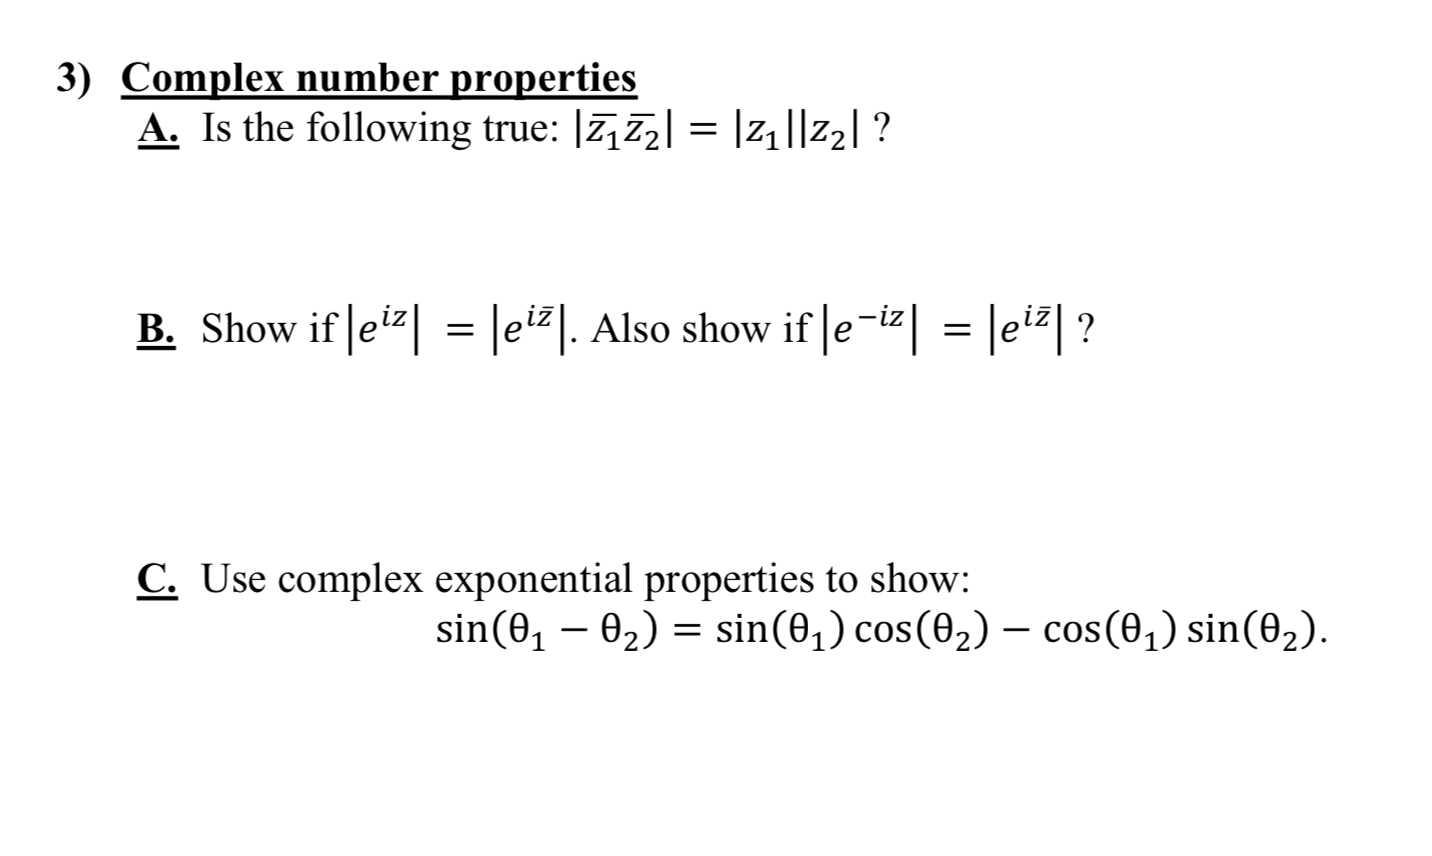 3) Complex number properties
A. Is the following true: |7,72| = |z|||Z2| ?
B. Show if ei| = lei#]. Also show if Je-iz| = |ei#| ?
C. Use complex exponential properties to show:
sin(0, – 02) = sin(0,) cos(02) – cos(0,) sin(02).
-
